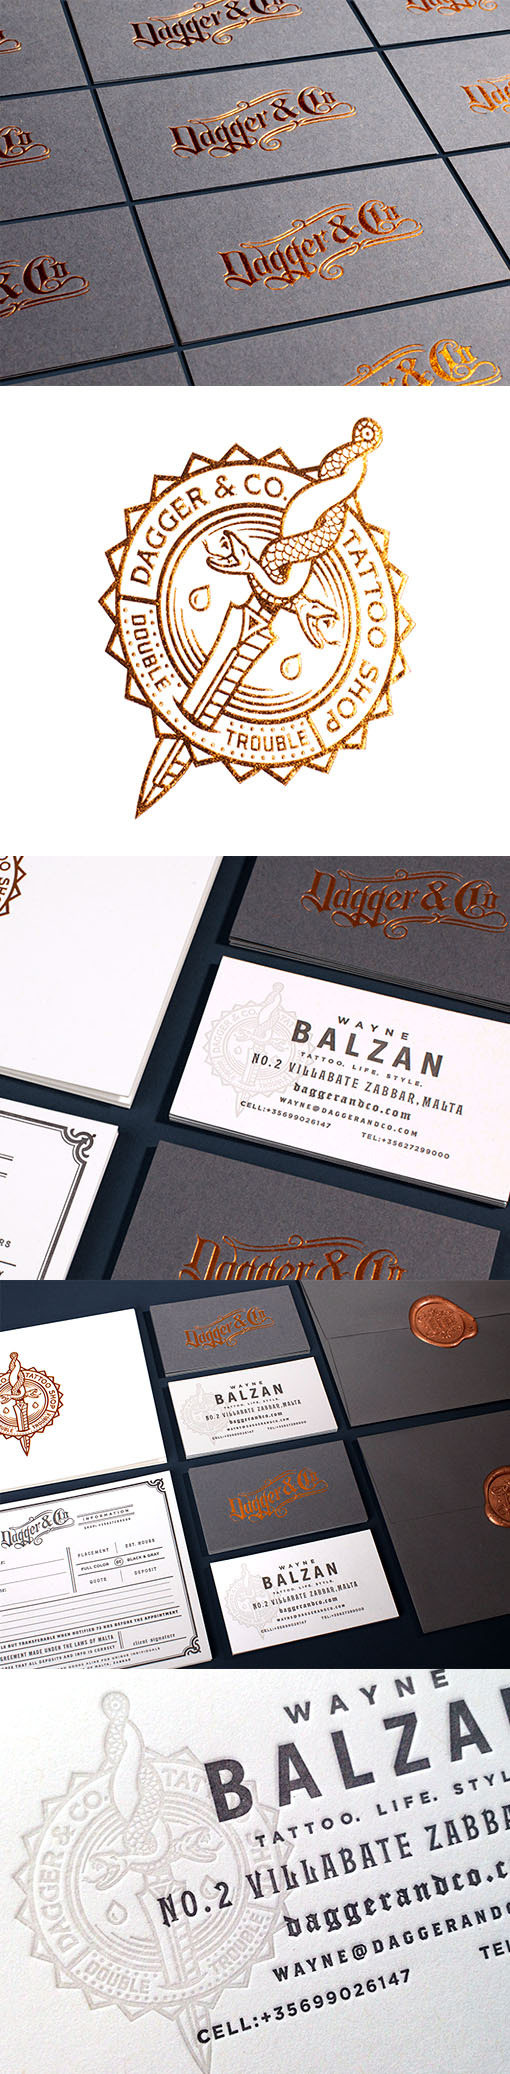 Modern Foil Stamped Business Card With Vintage Styling For A Tattoo Artist